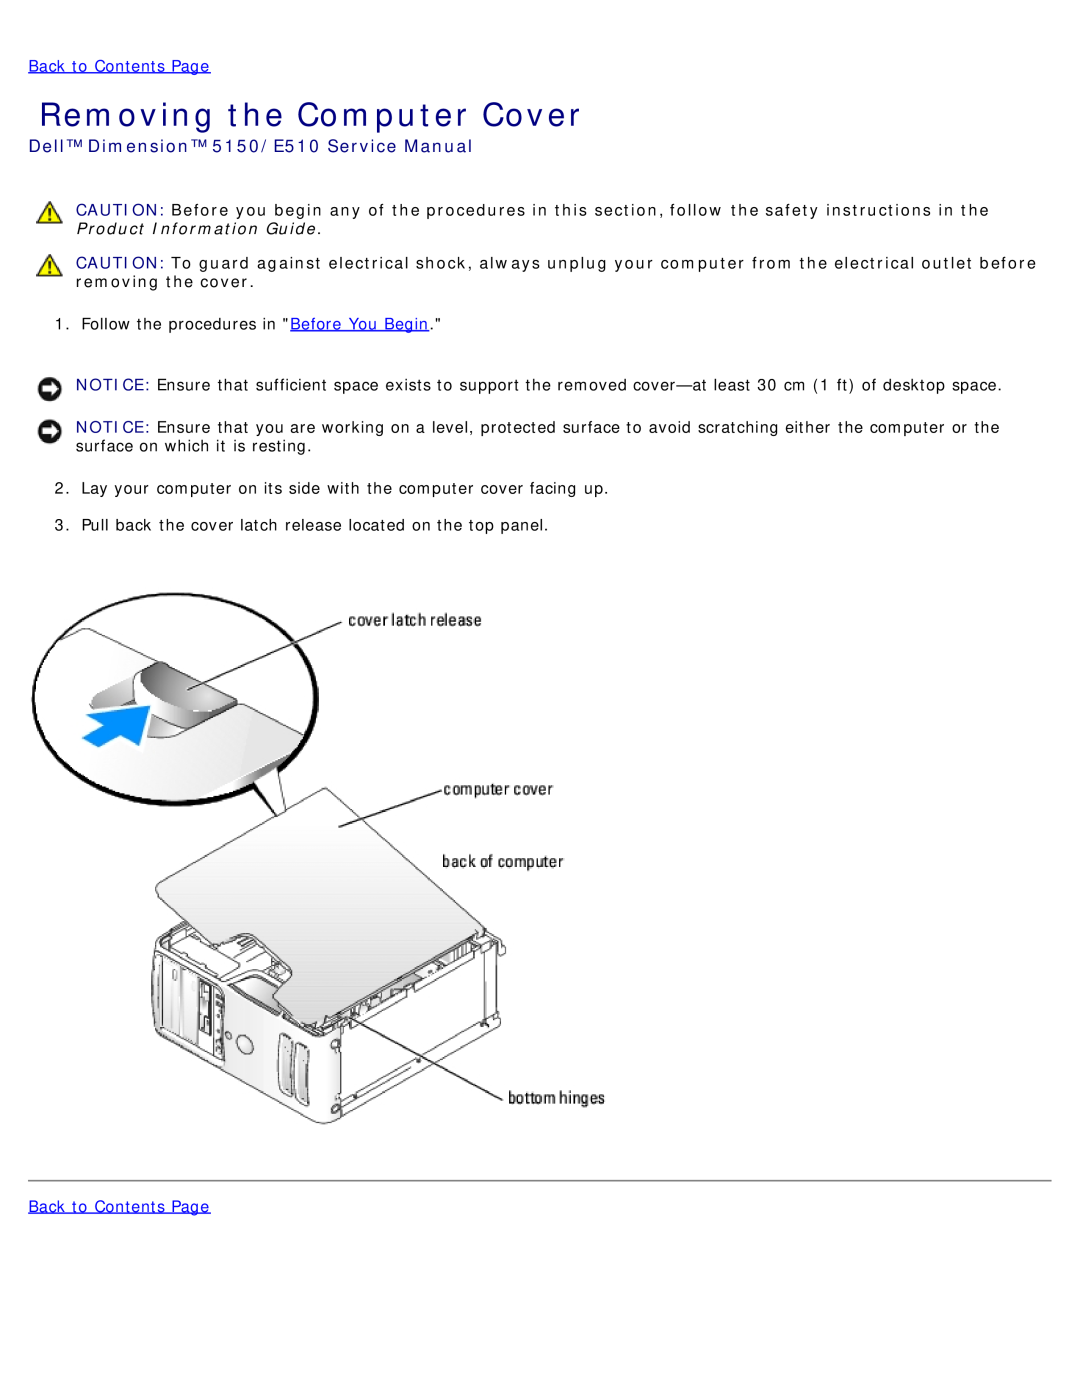 Dell DCSM manual Removing the Computer Cover, Dell Dimension 5150/E510 Service Manual, Back to Contents Page 